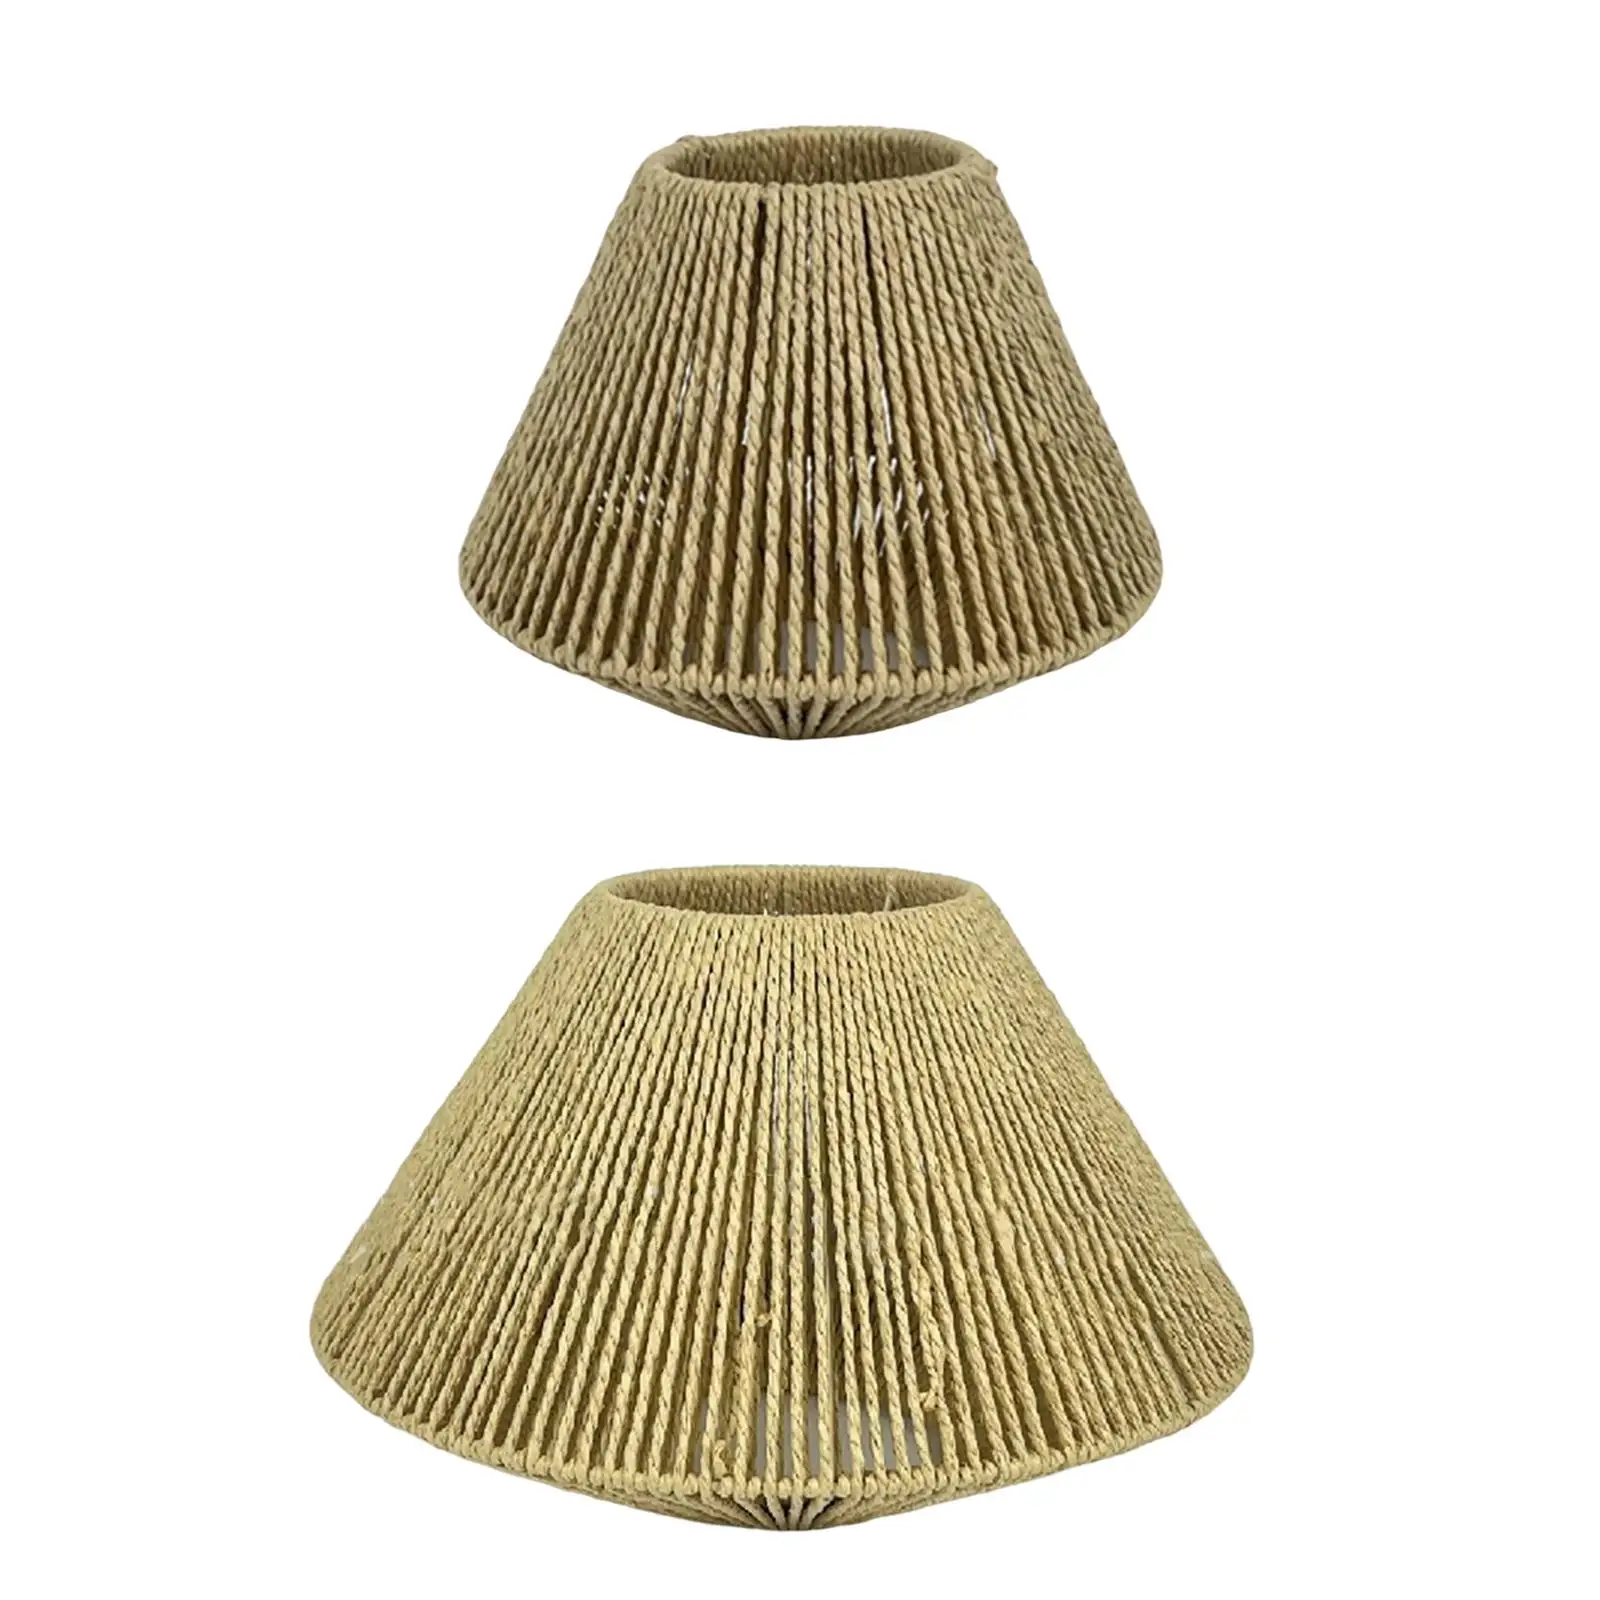 Rustic Chandelier Cover Light Cover Replacement Removable Handwoven Lampshade for Dining Room Restaurant Bedroom Bar Decor